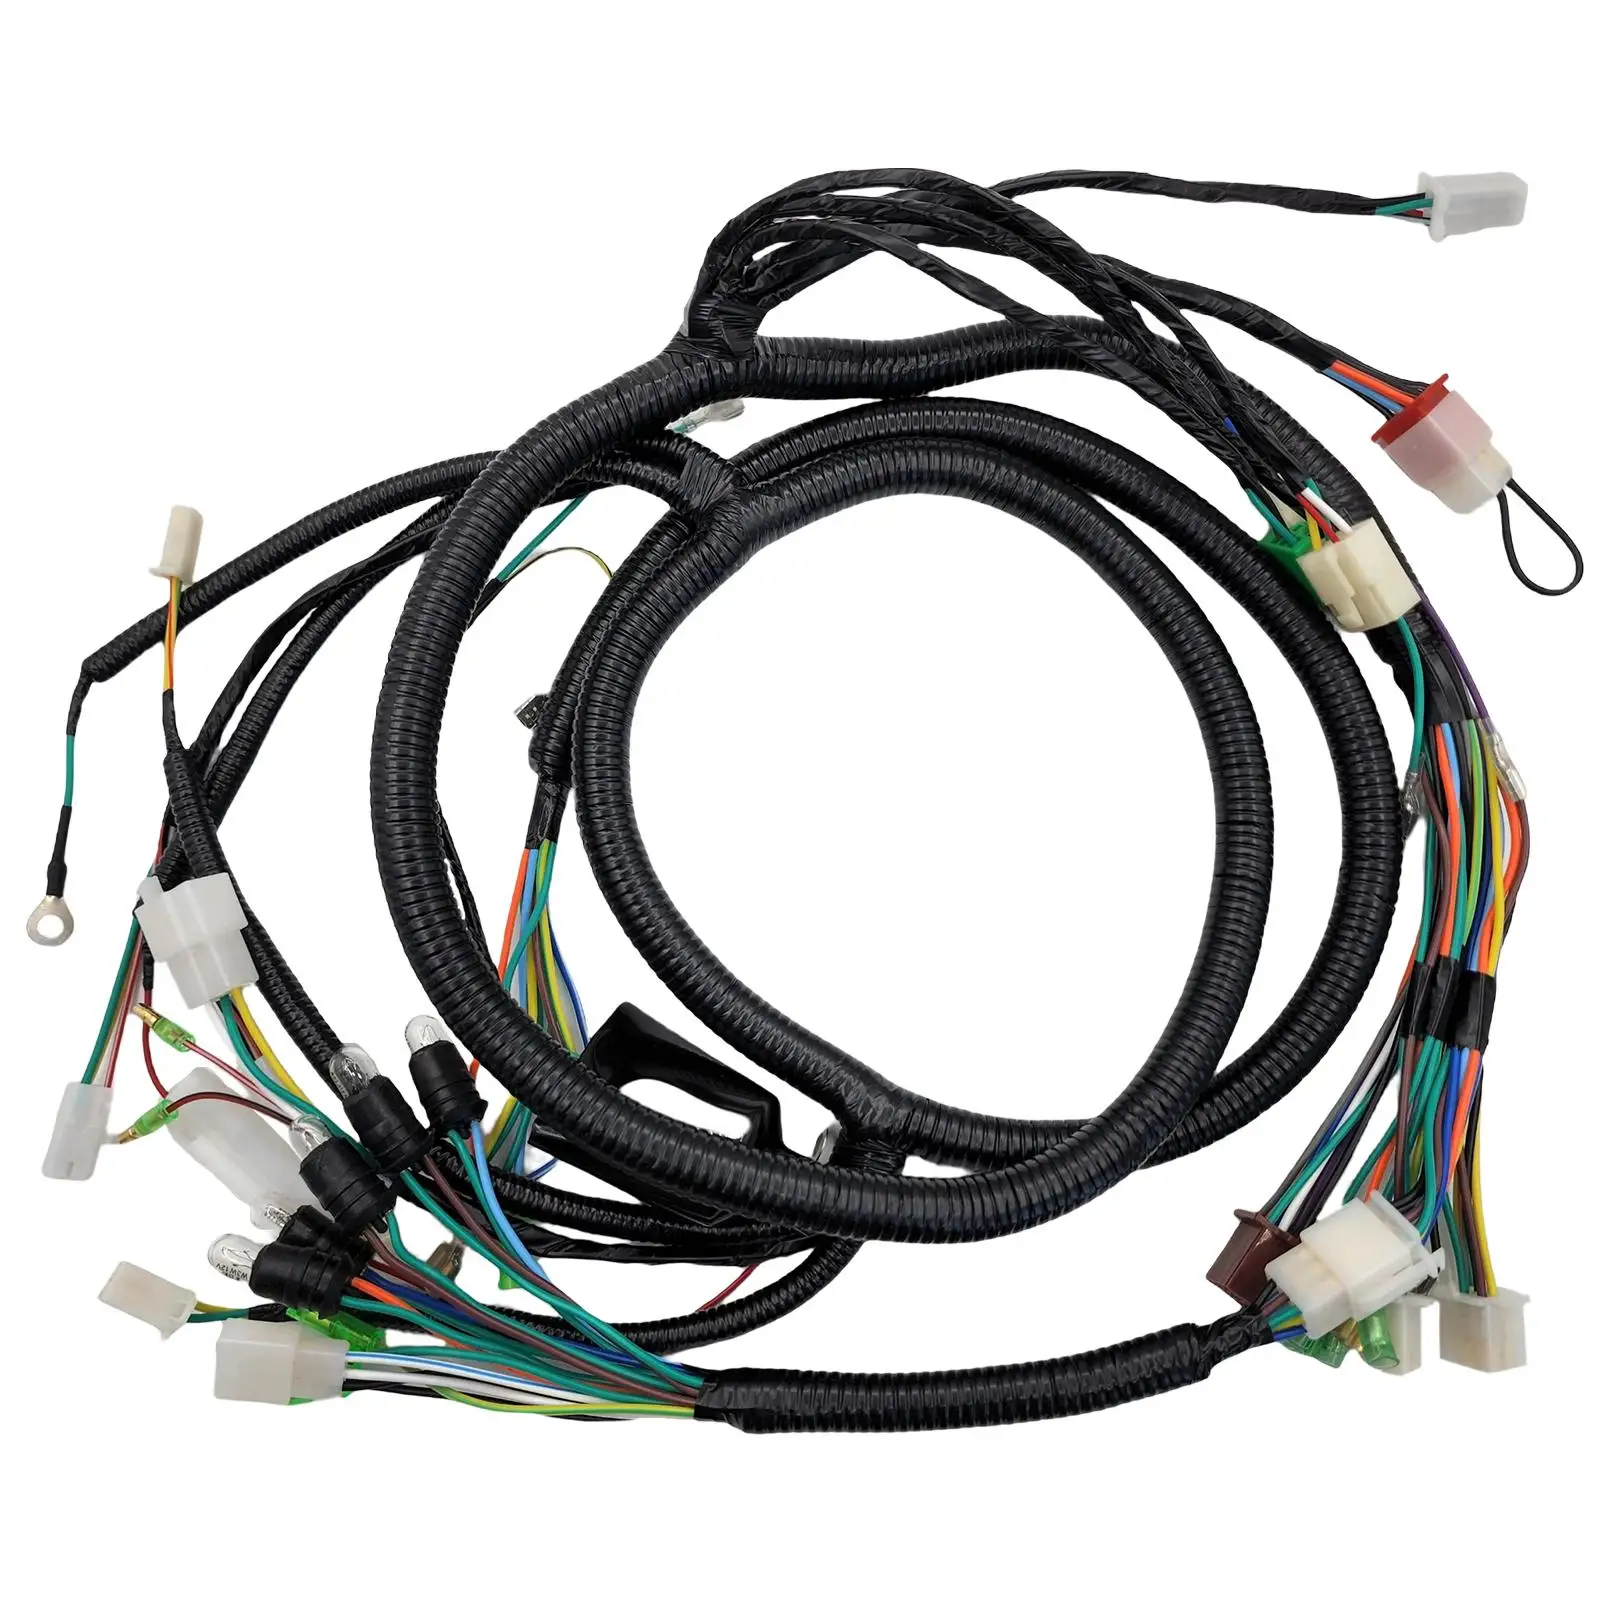 Replacement Harness Kits Replaces Spare Parts Wiring Harness